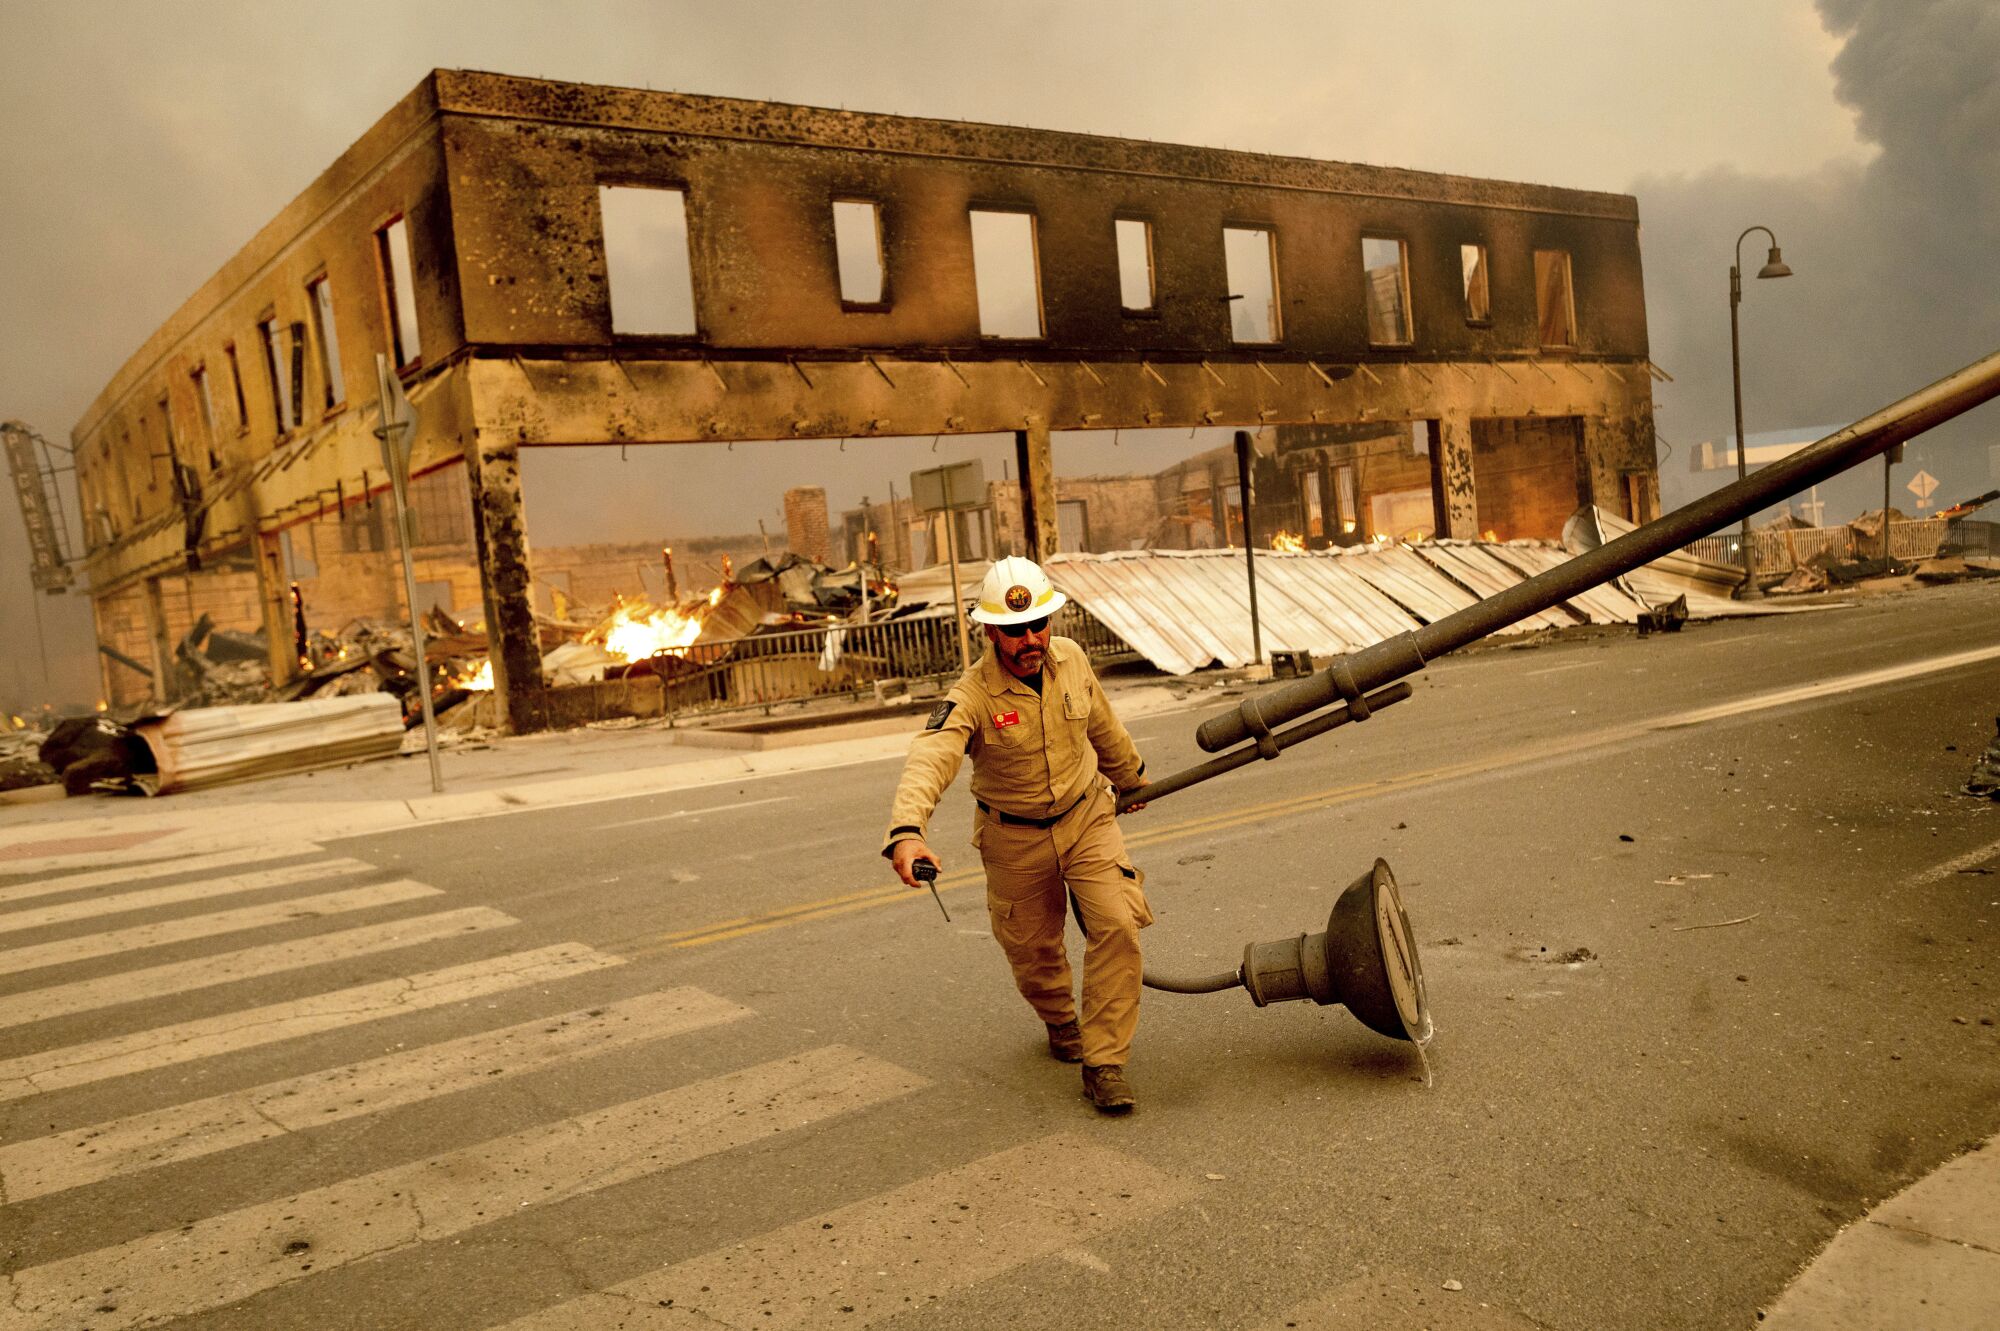 A man drags one end of a light pole across a street in front of a burned-out two-story building